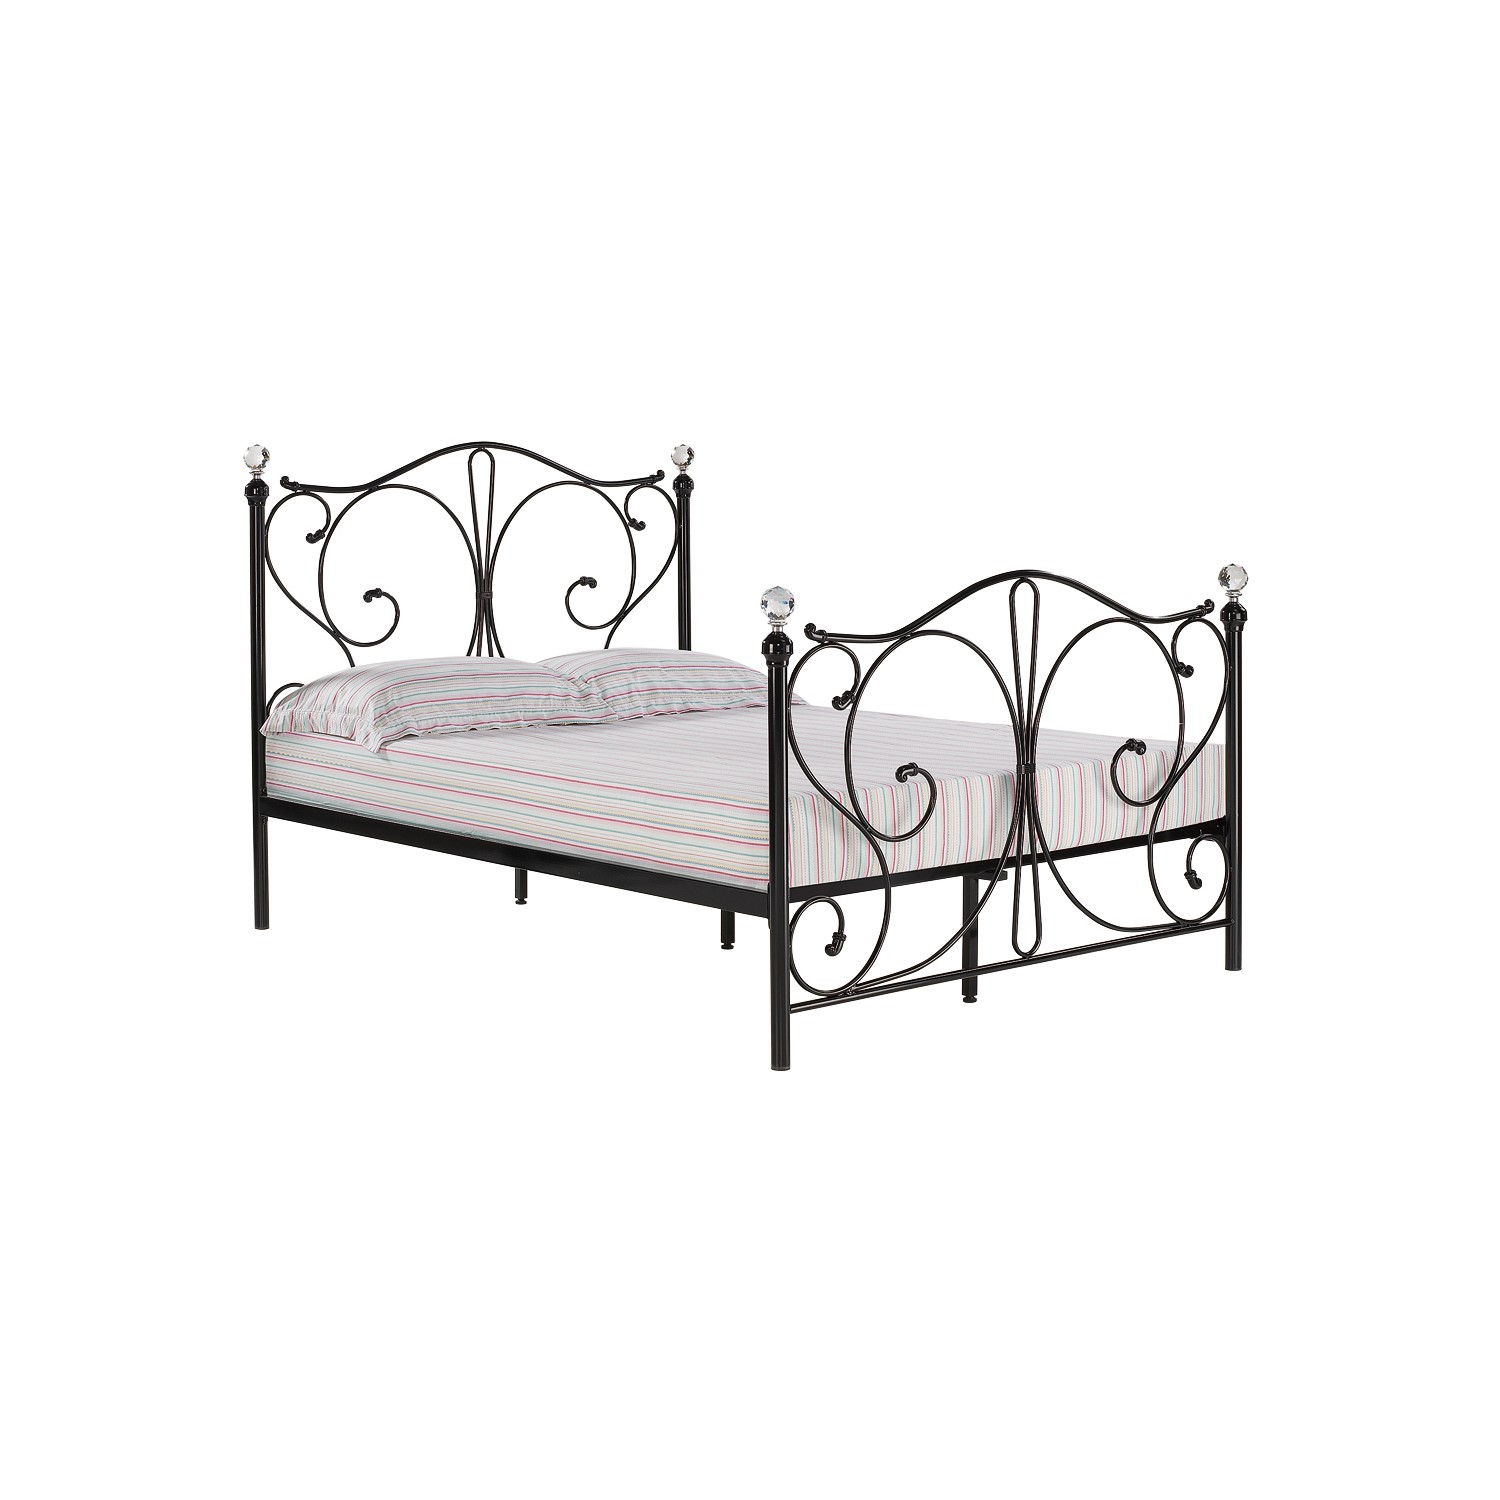 Read more about White metal double bed frame with crystal finials florence lpd